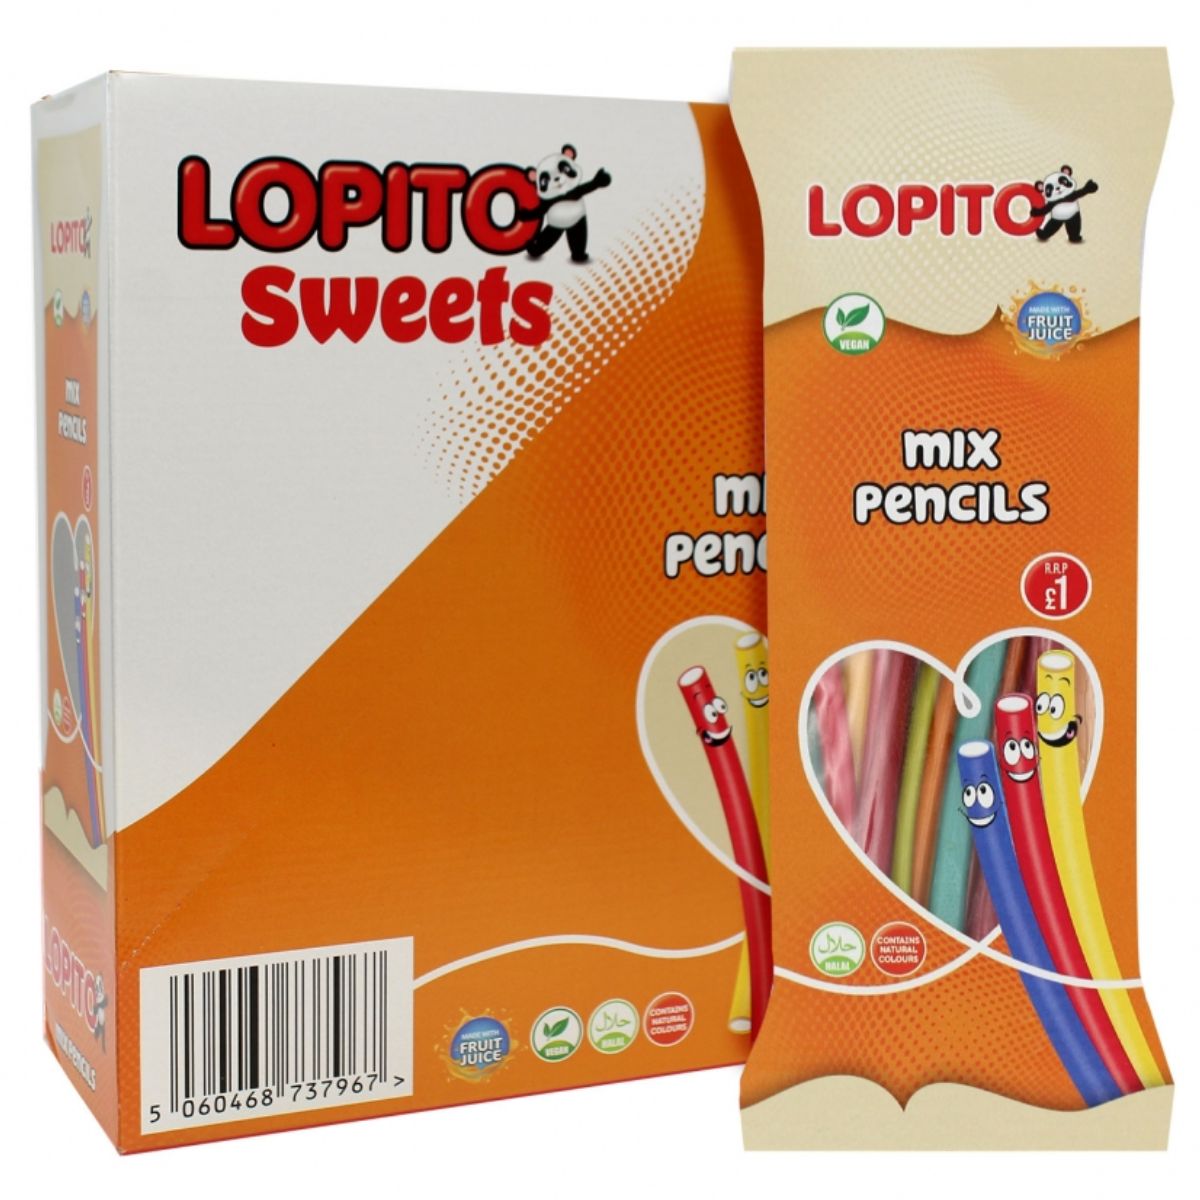 Lopito sweets mix pencils in a box.